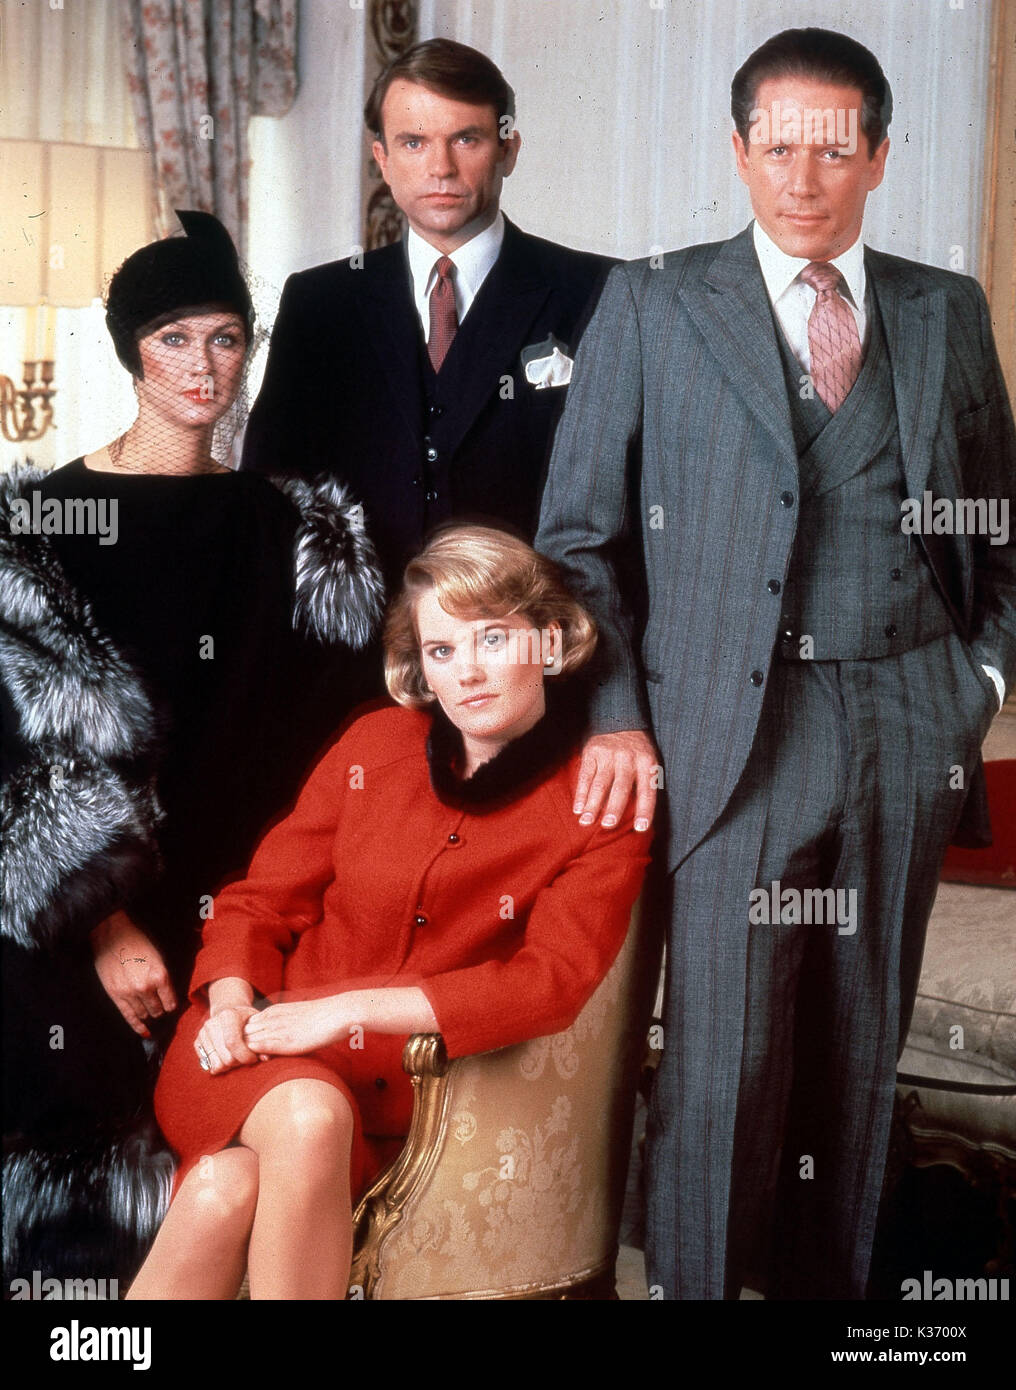 KANE & ABEL VERONICA HAMEL, SAM NEILL, KATE McNEI AND PETER STRAUSS A SCHRECKINGER COMMUNICATIONS PRODUCTION     Date: 1985 Stock Photo